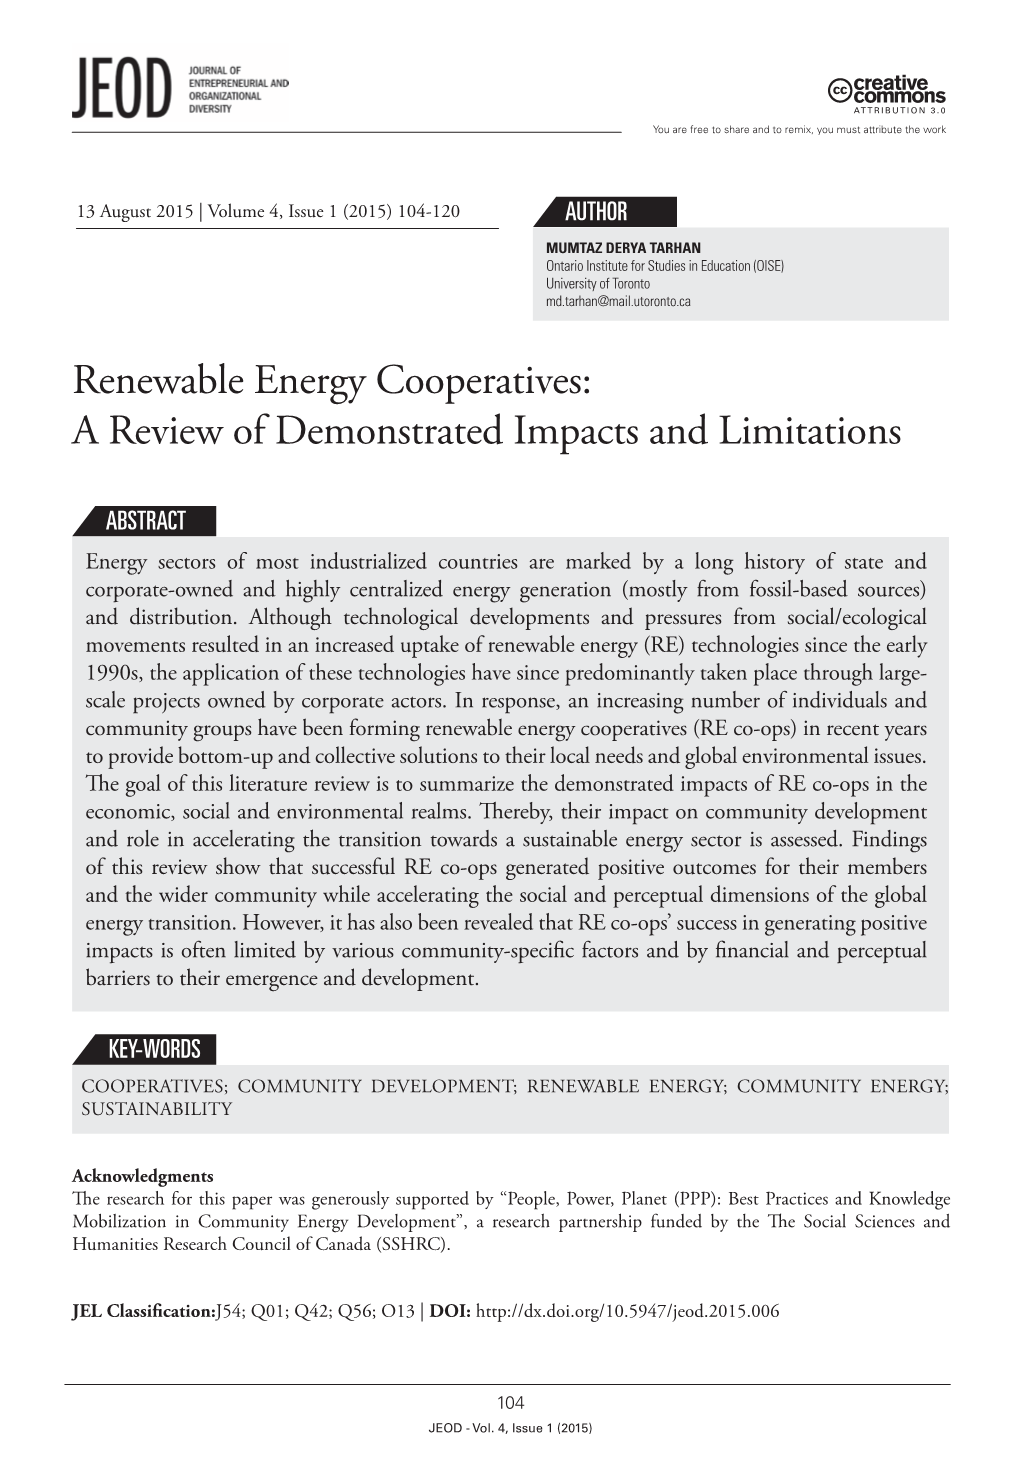 Renewable Energy Cooperatives: a Review of Demonstrated Impacts and Limitations